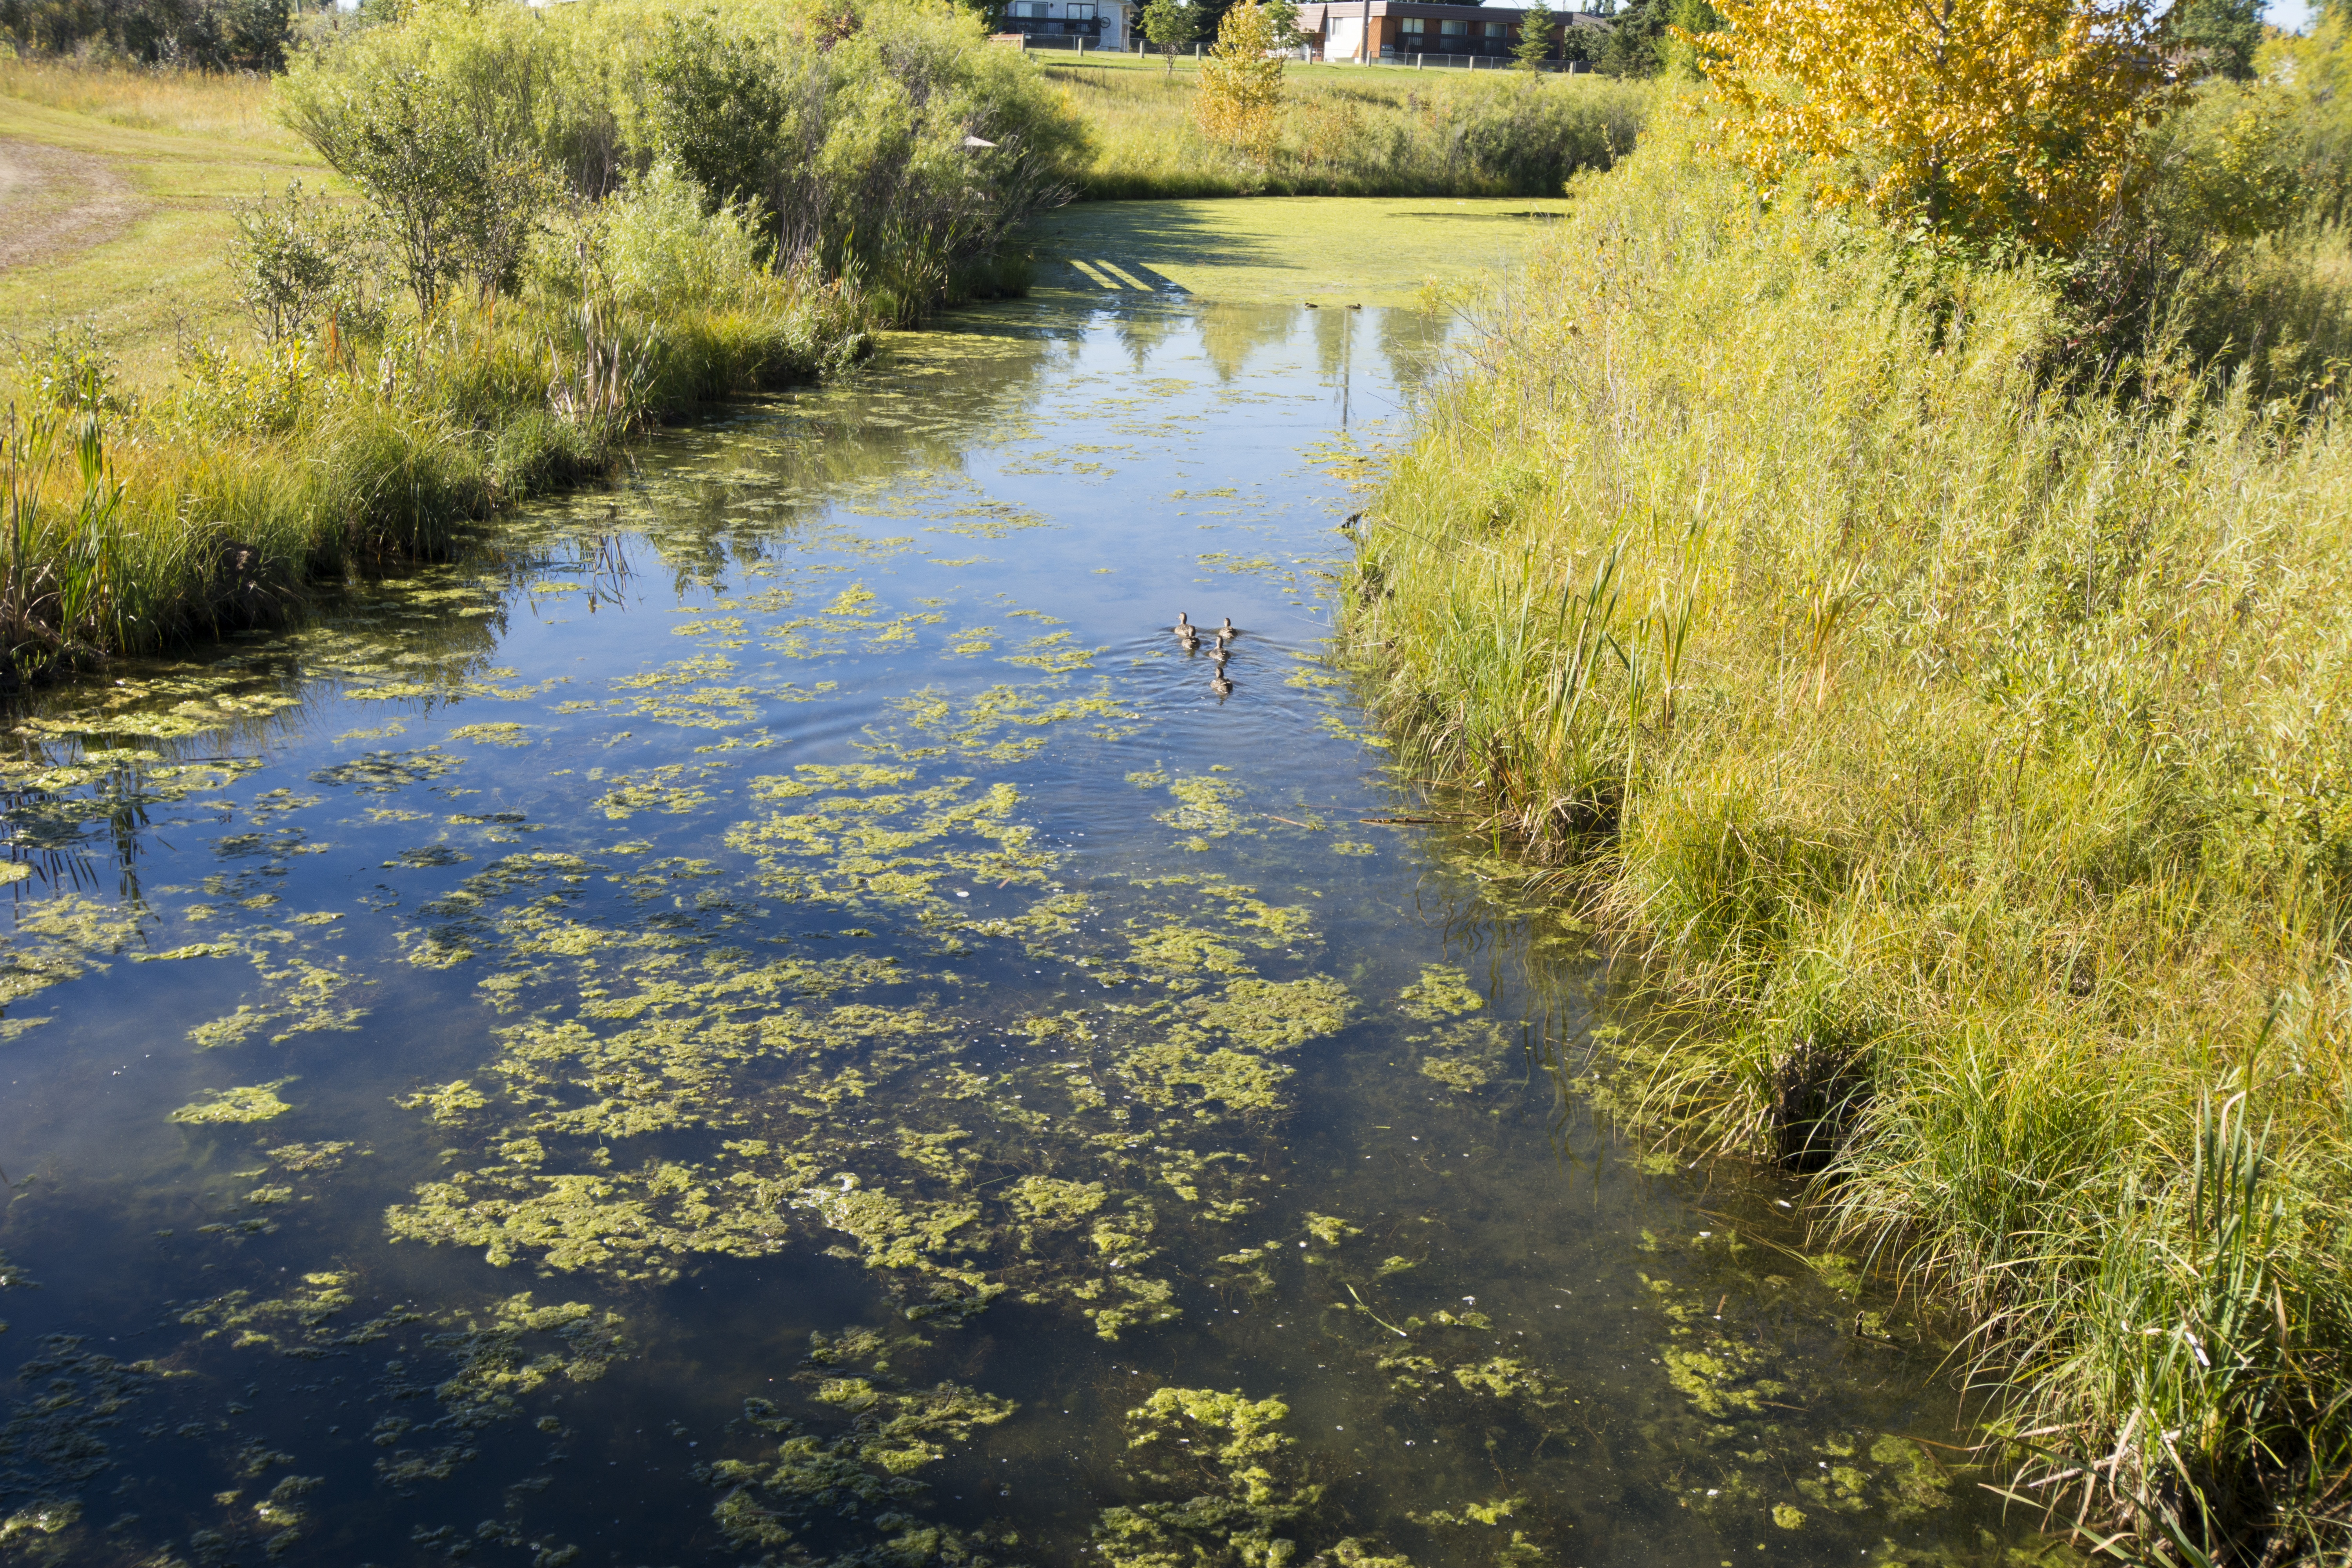 SUSTAINABILITY – These wetlands located in Clearview Meadows on the Michener Centre’s property were constructed to help storm water make its way back to the river cleanly.